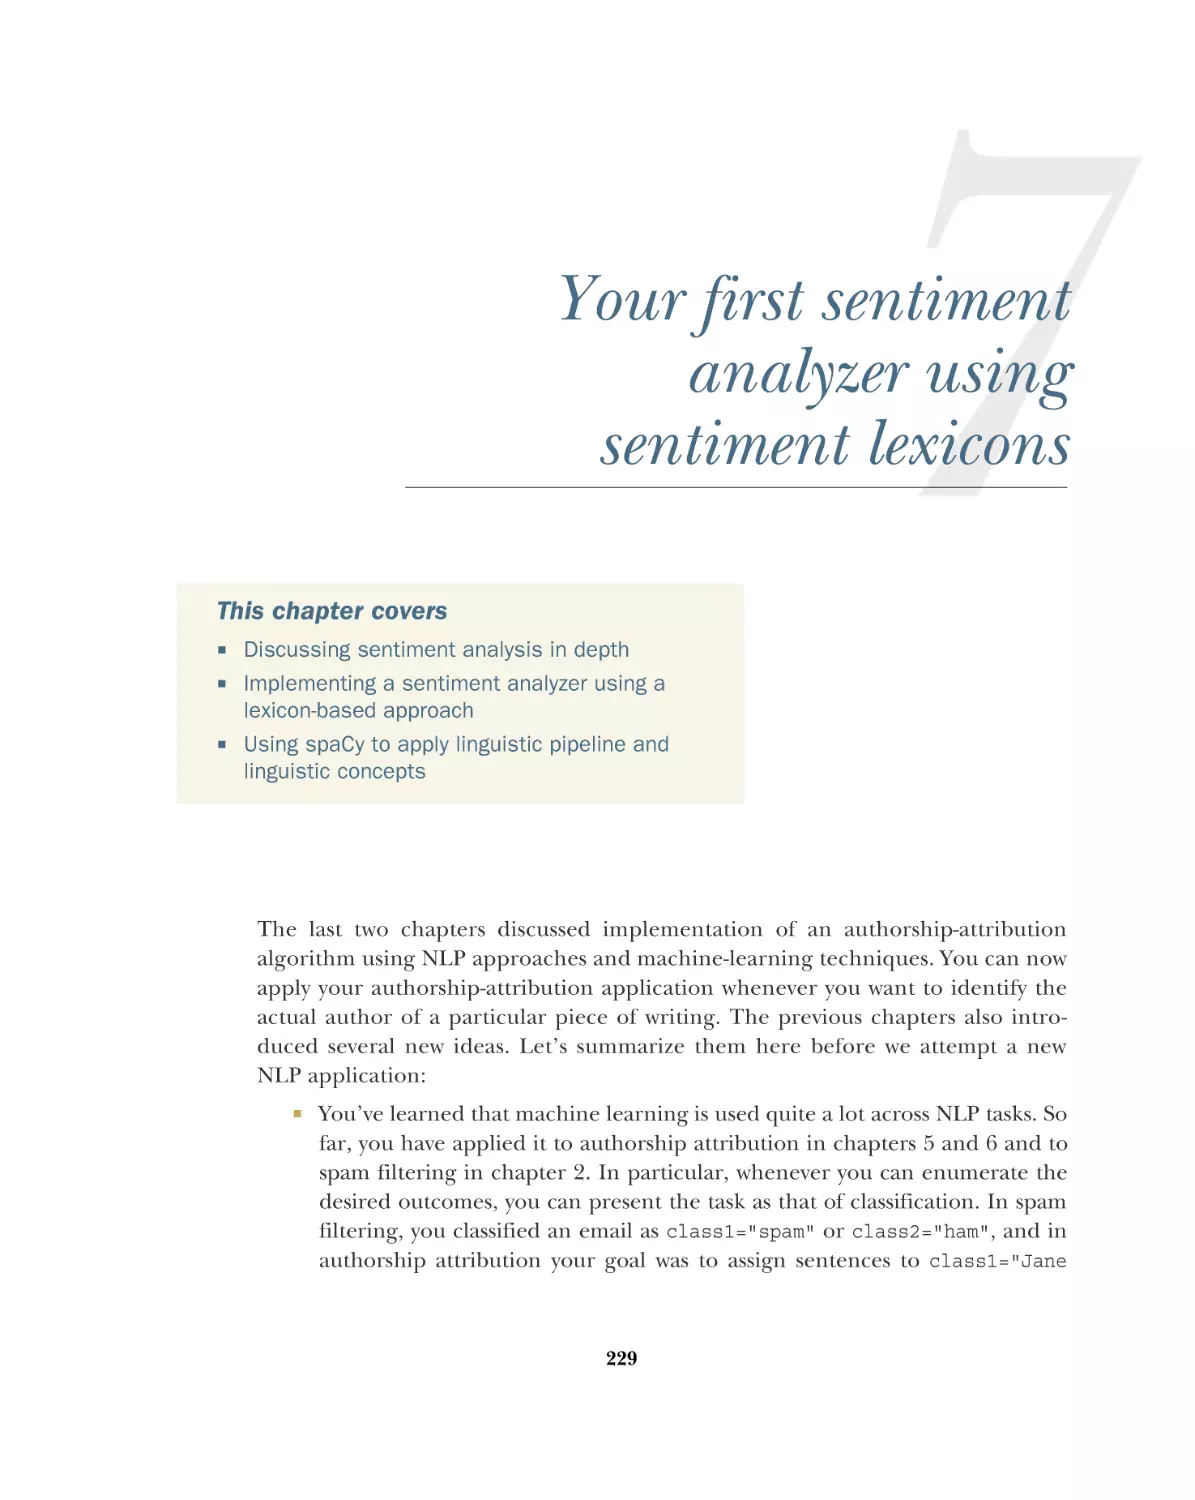 7 Your first sentiment analyzer using sentiment lexicons